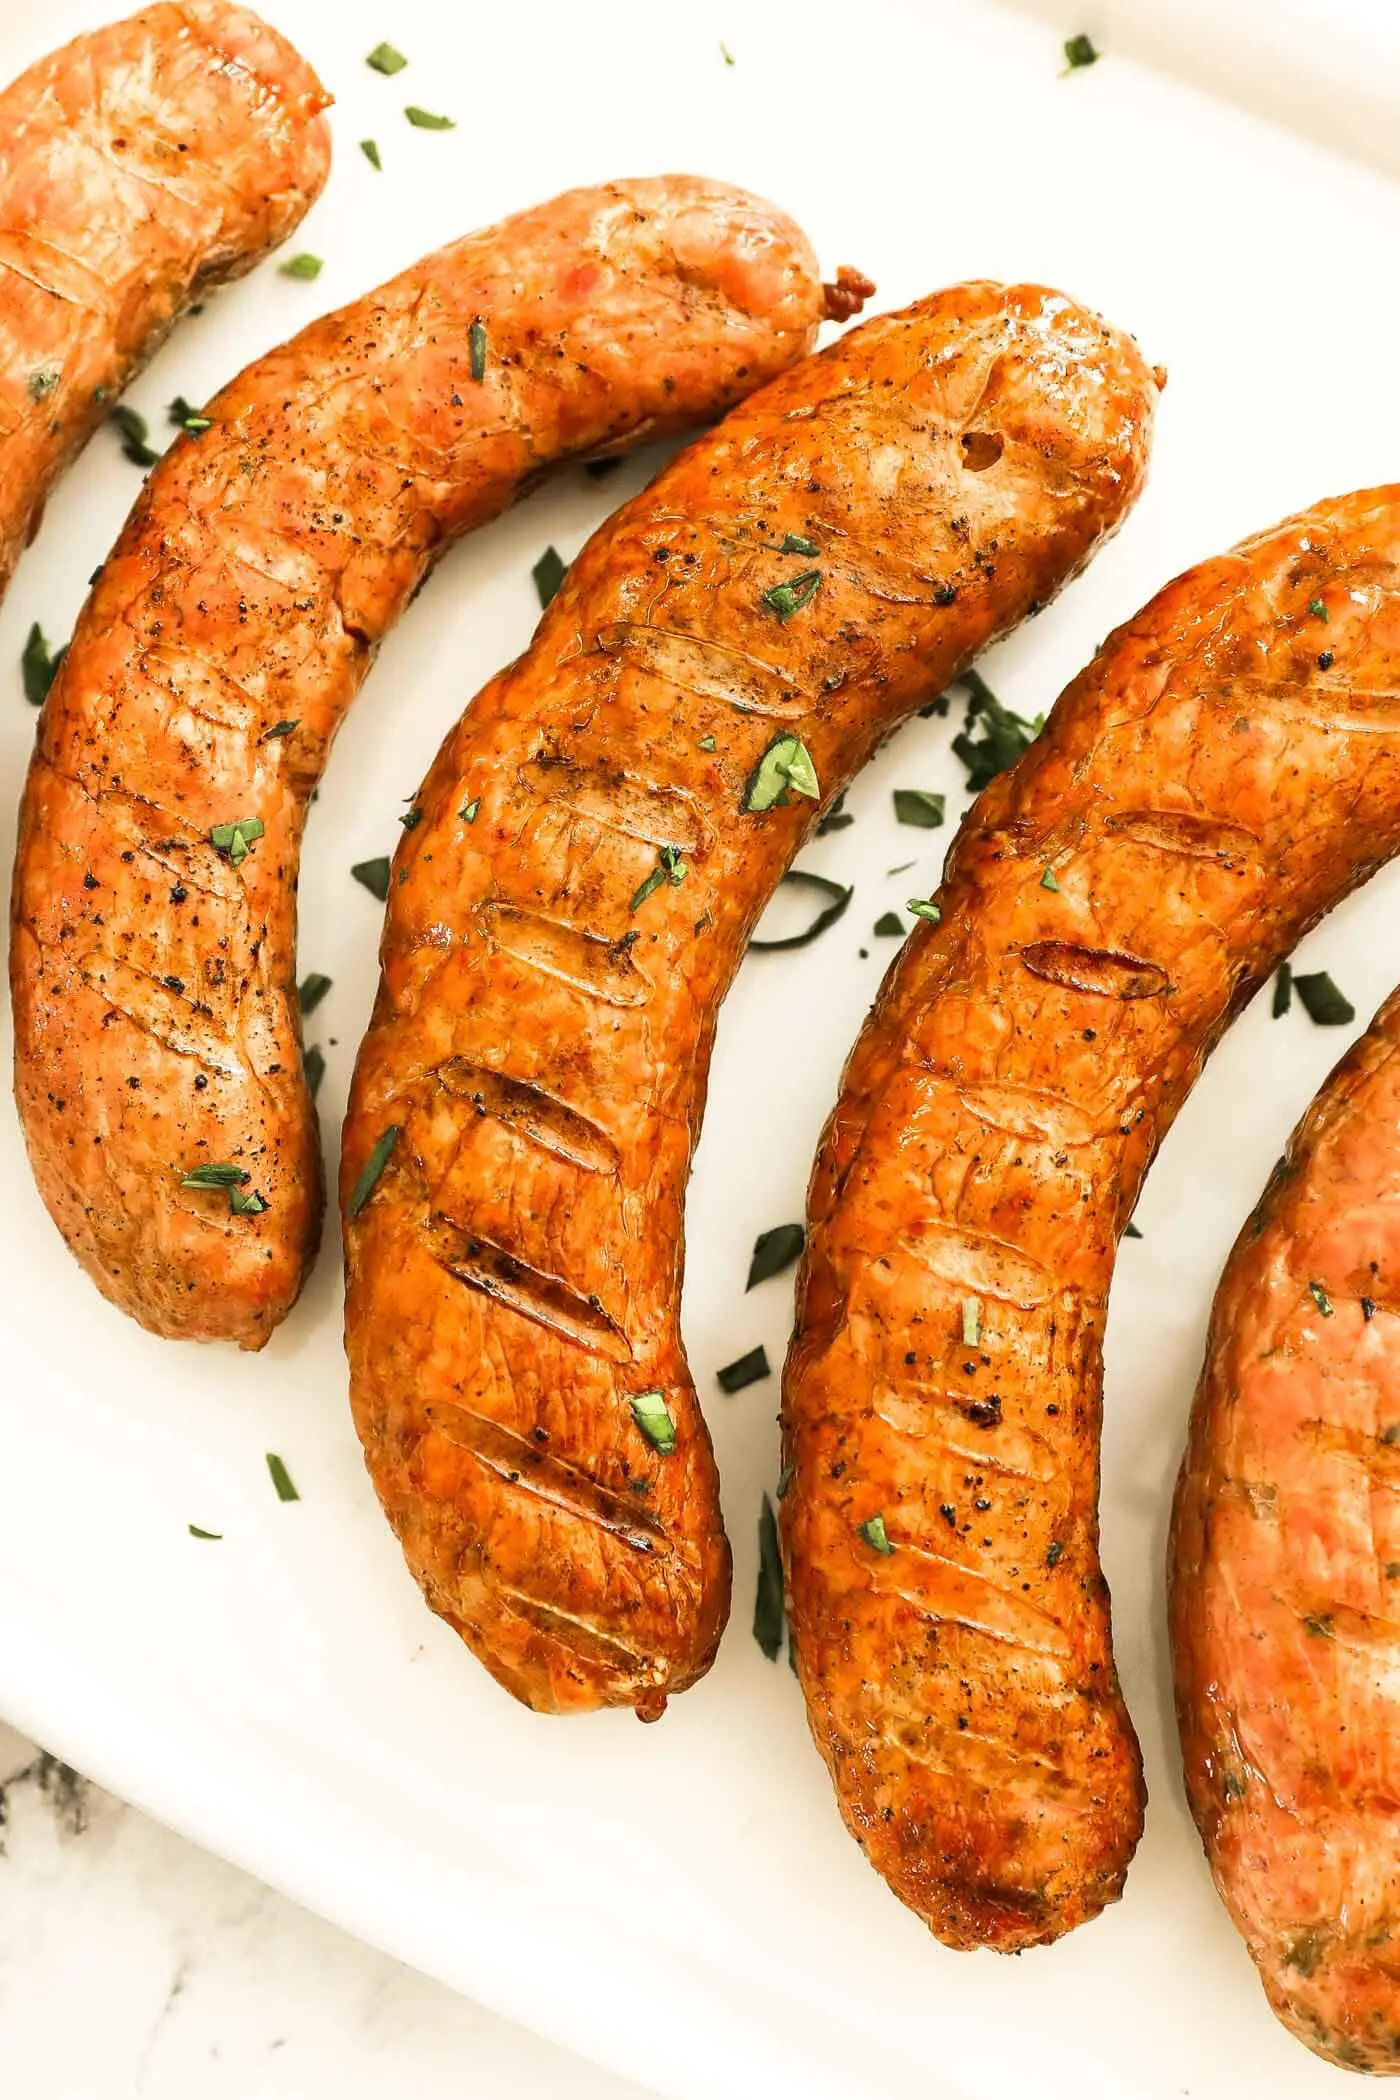 highly seasoned smoked sausage - What is highly seasoned smoked beef called